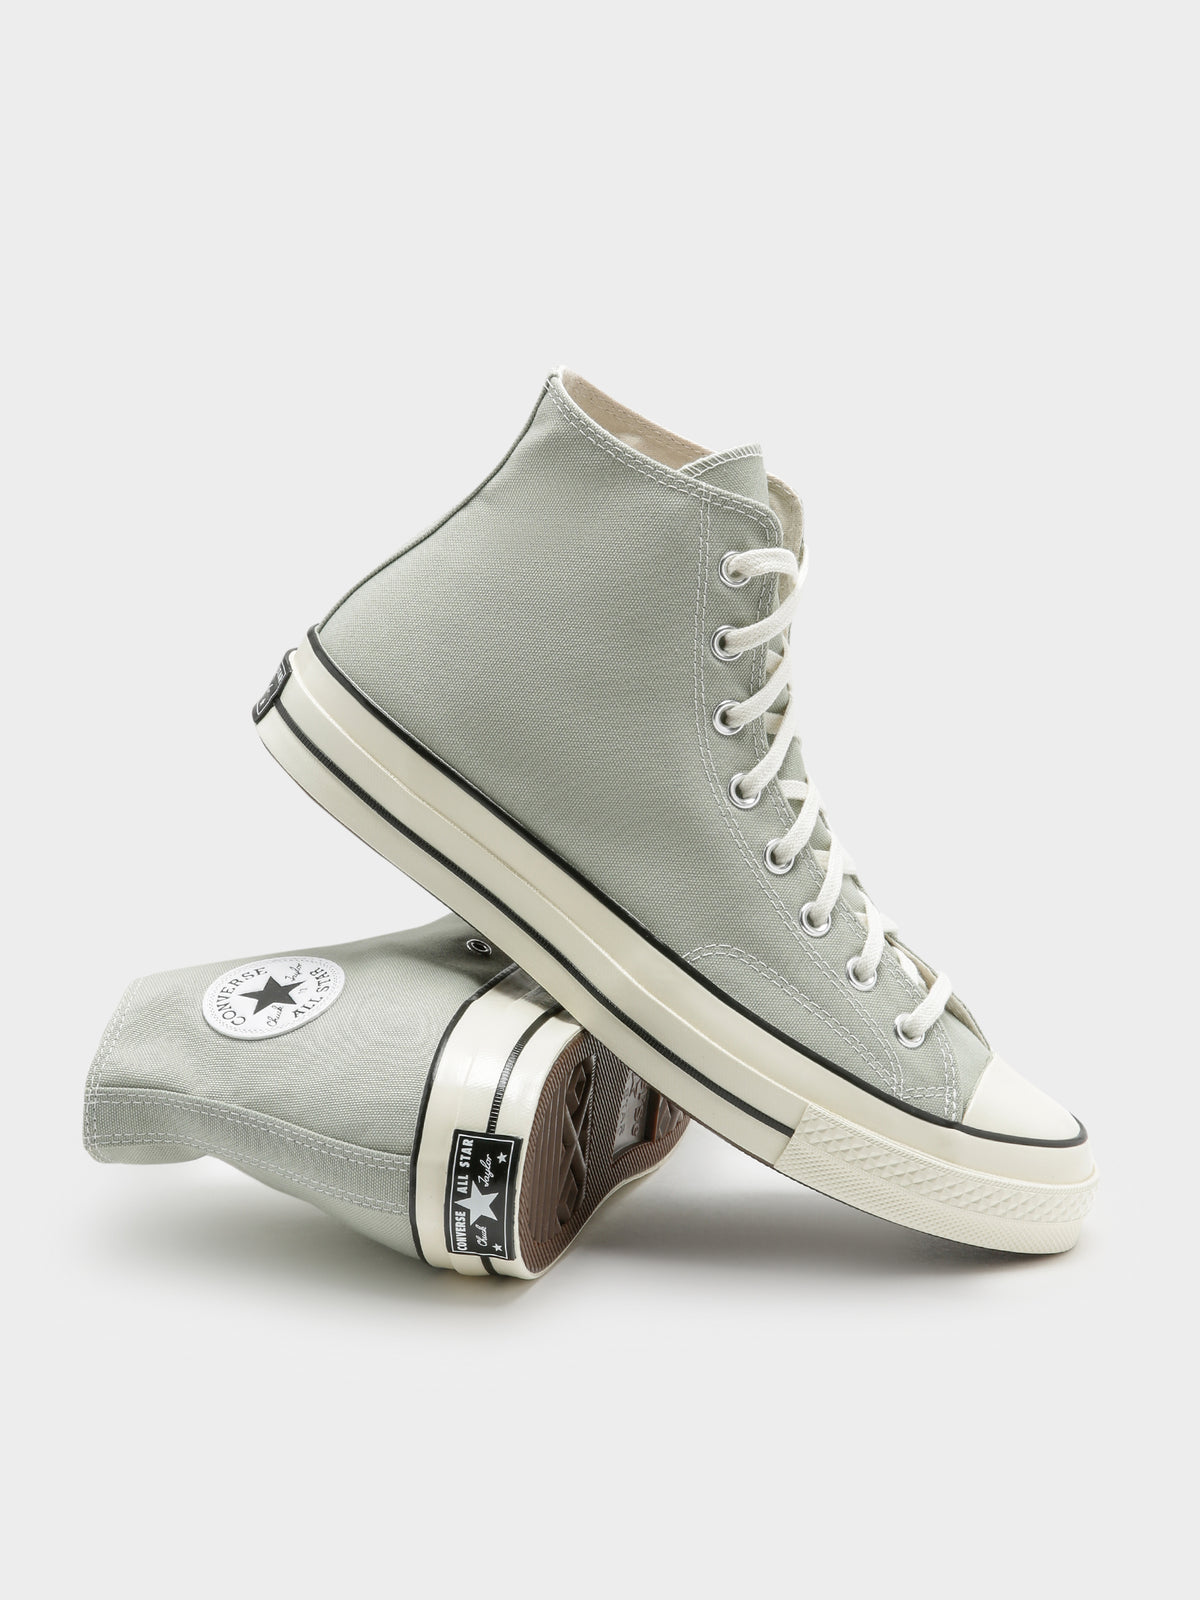 Unisex Chuck 70 High Sneakers in Summit Sage